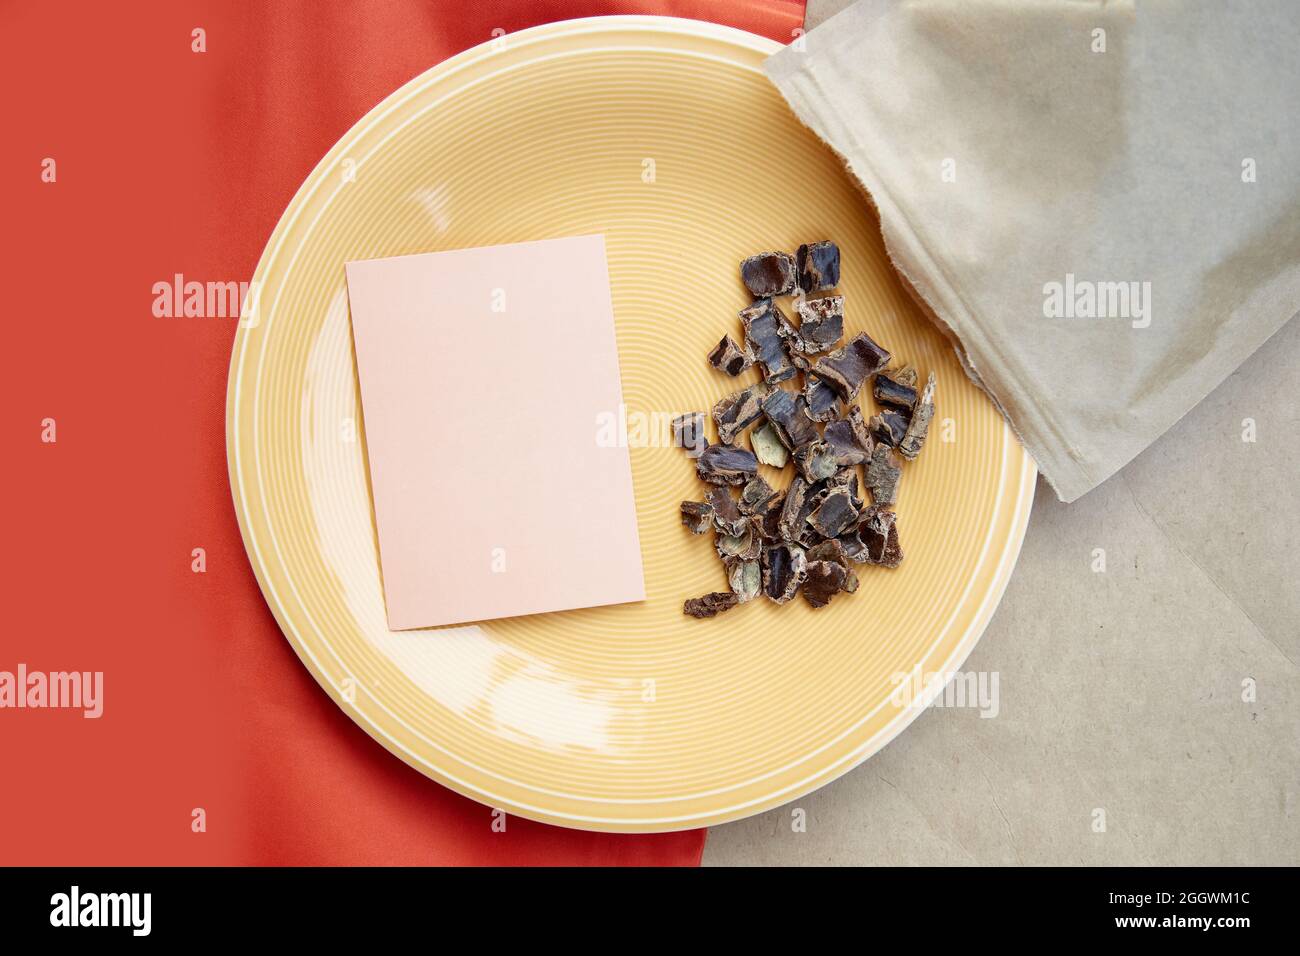 Carob - coffee alternative - organic product on the plate. Natural plant-based caffeine antioxidants. Mock up of business card. High quality photo Stock Photo